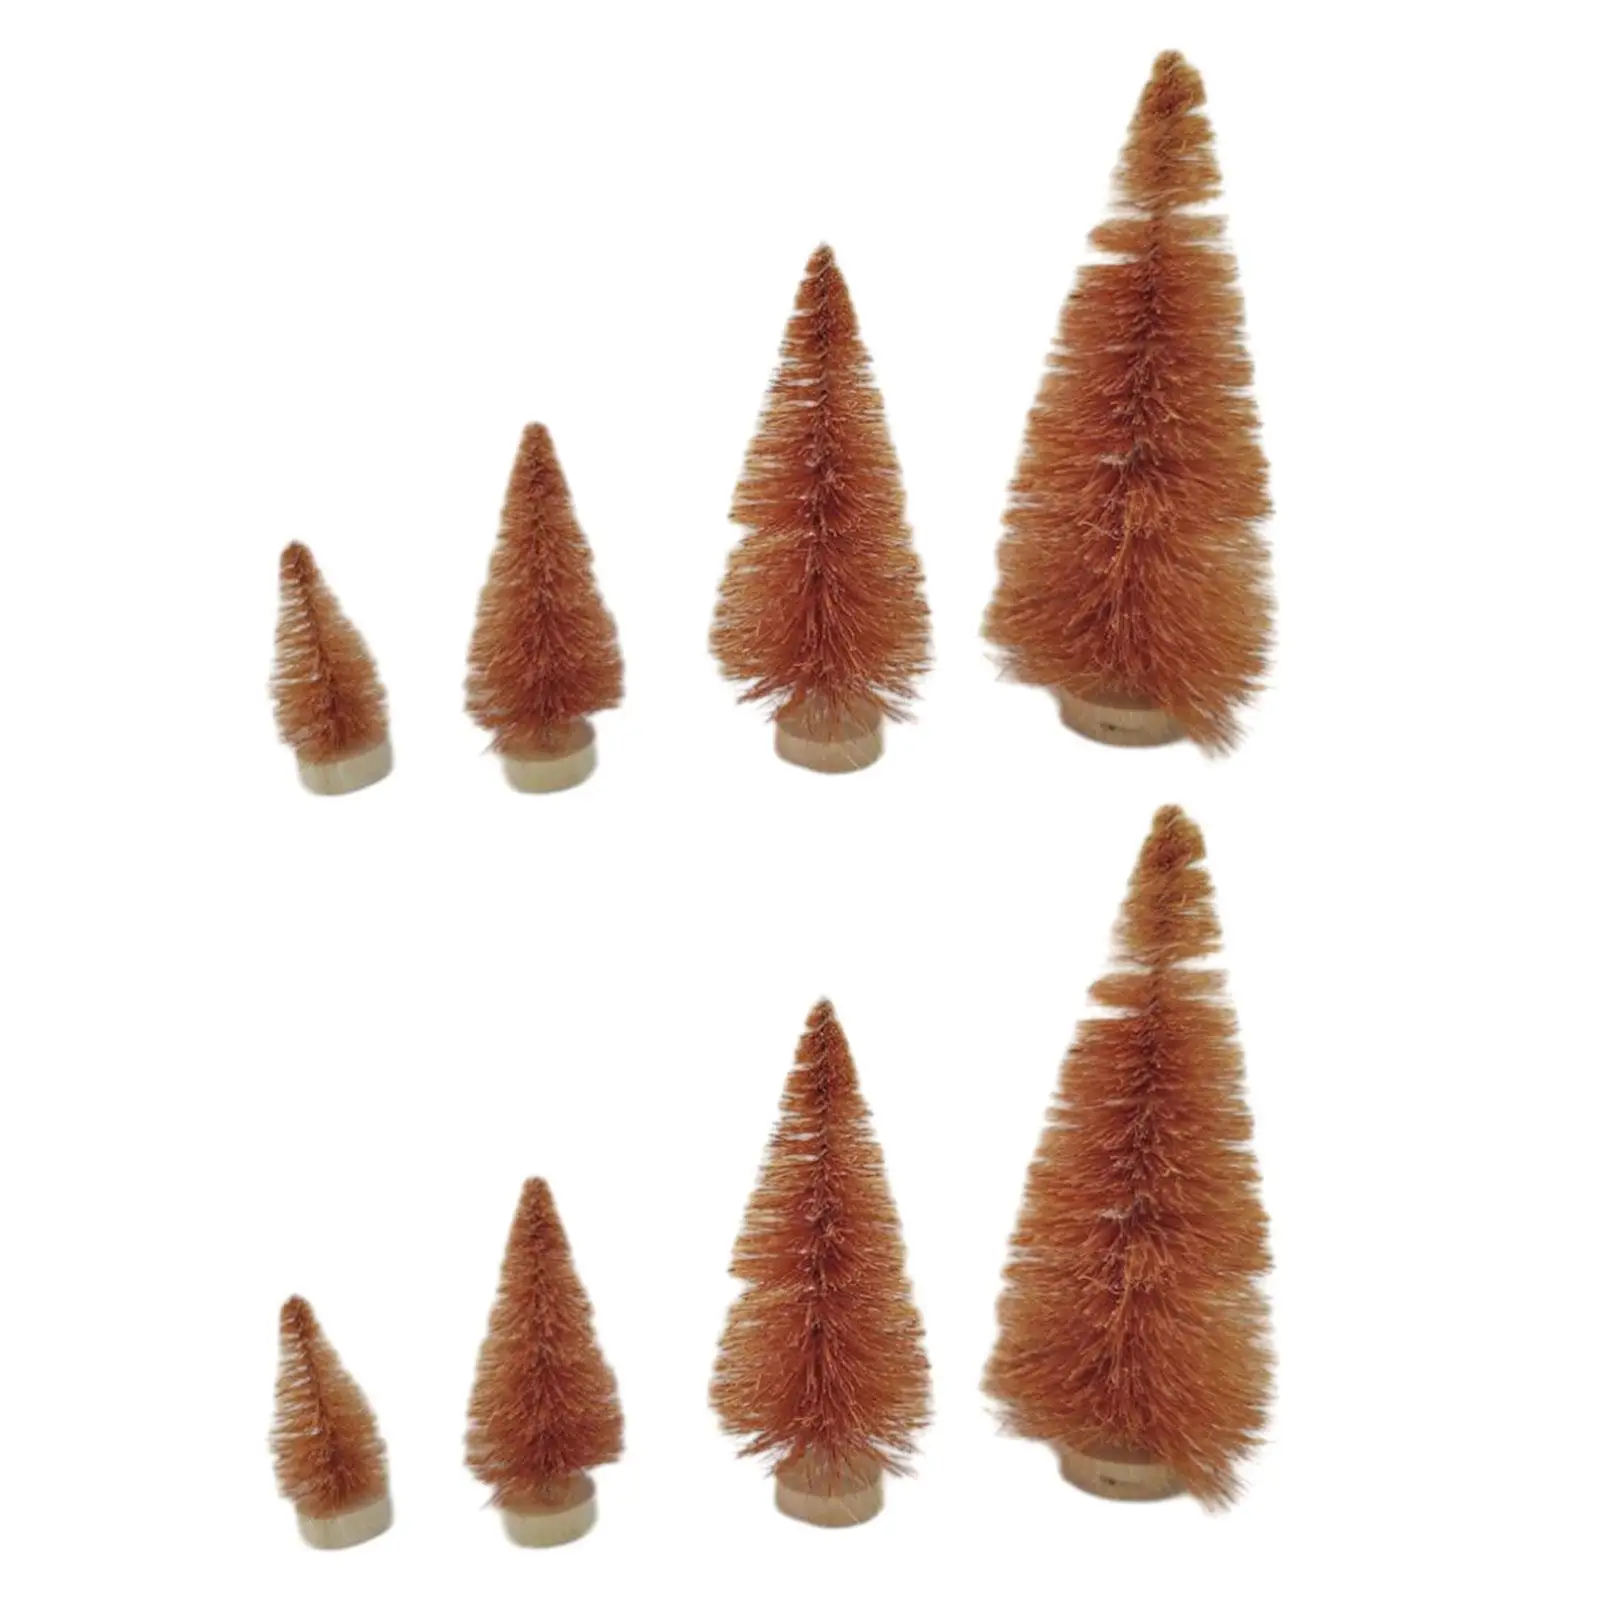 8x Artificial Christmas Tree Table Mini Models Wooden Base Crafts Christmas Decor for Centerpiece Party Bar Dollhouse Indoor